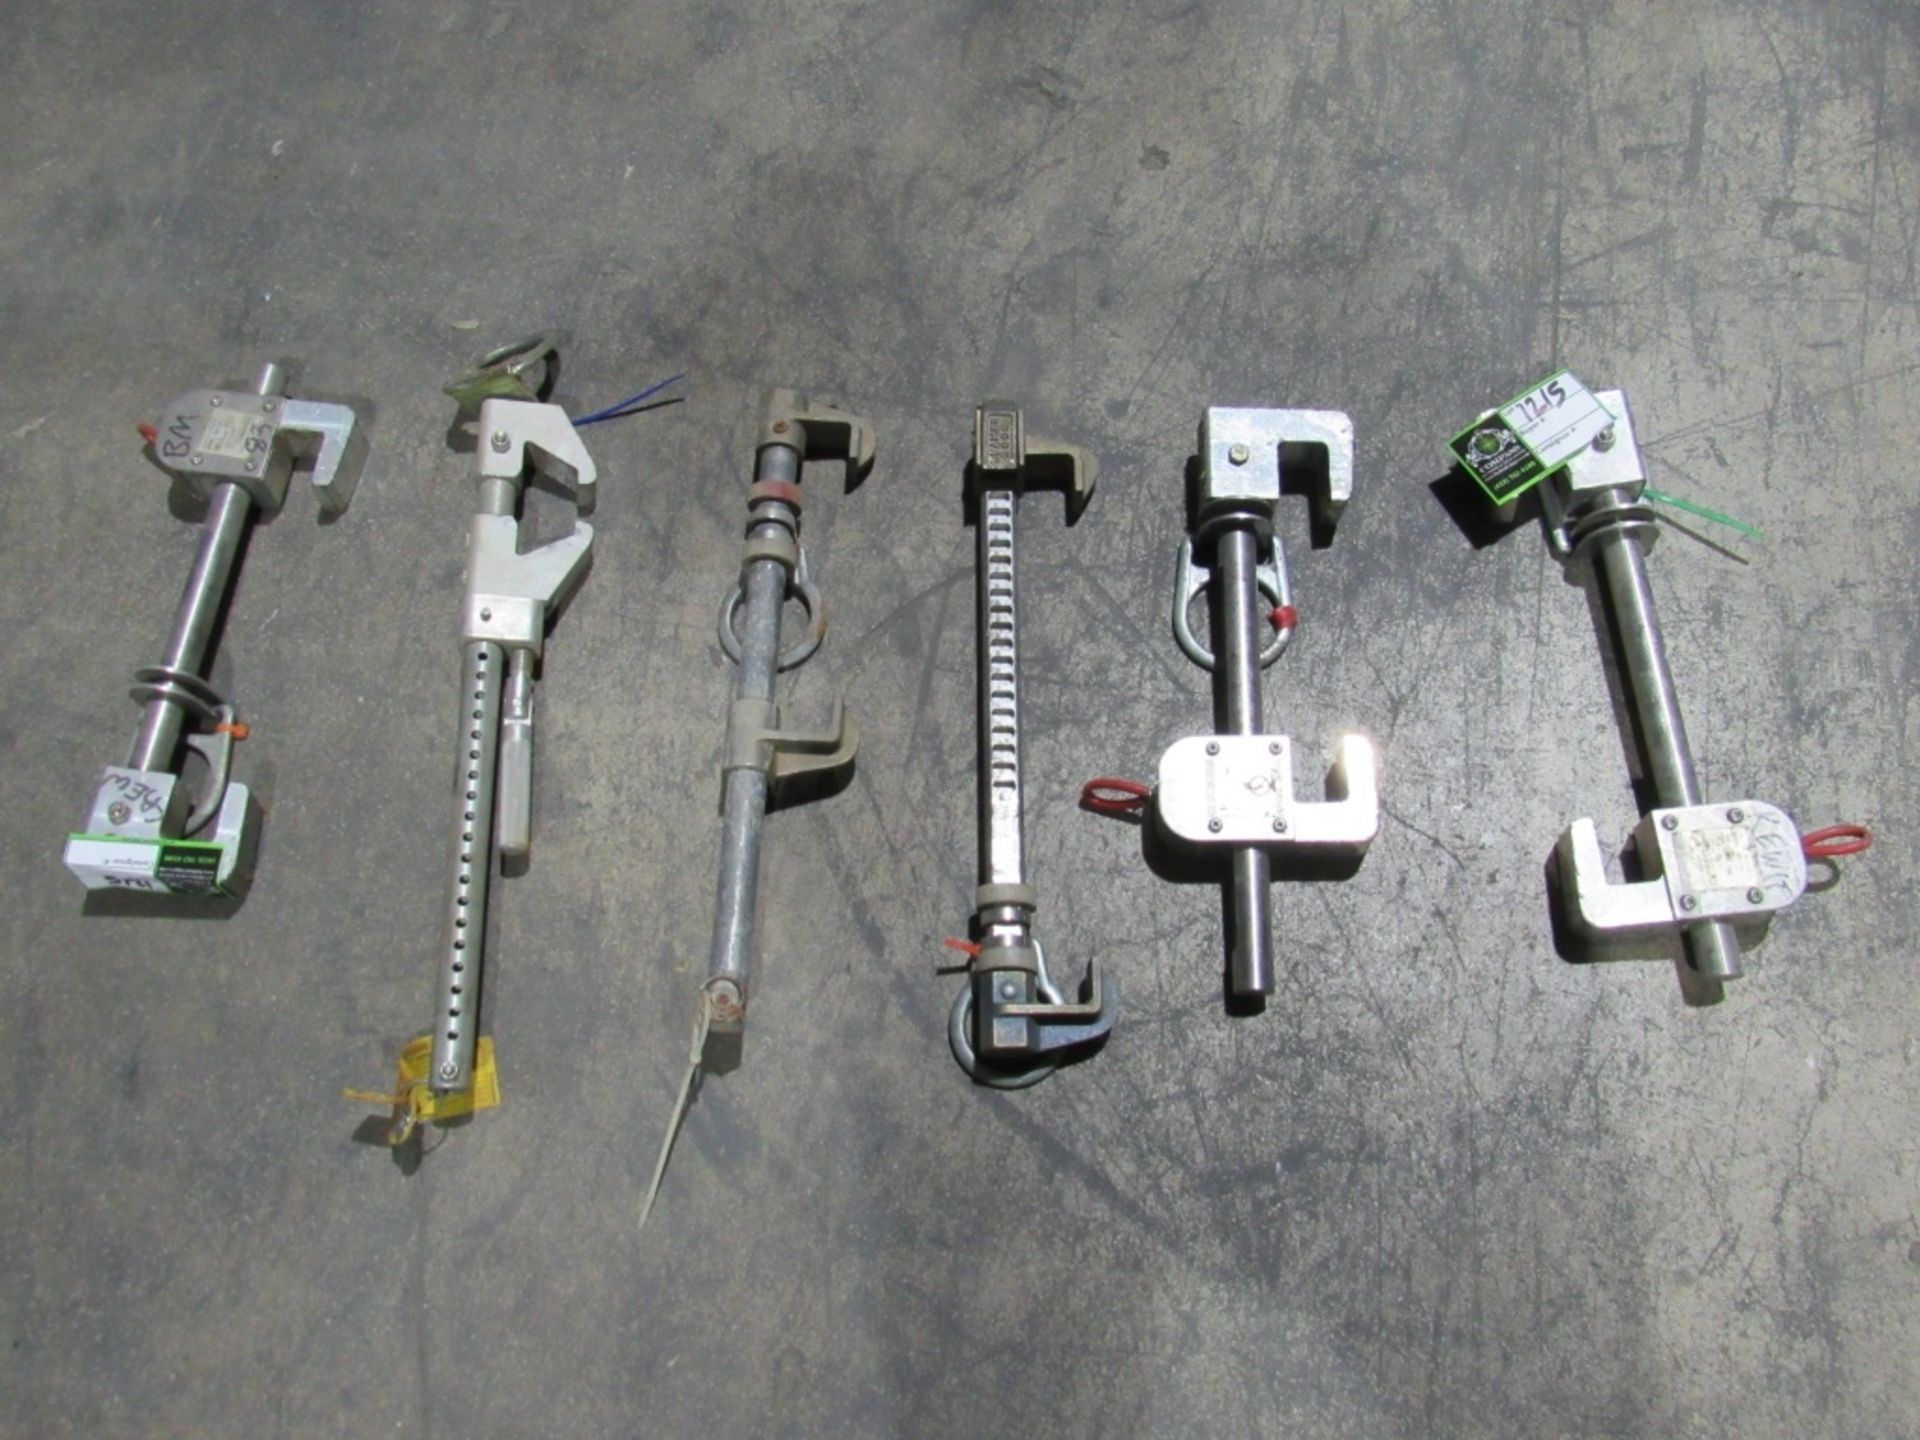 (qty - 6) Beam Anchors- MFR - Miller, SALA 1' **Basket SOLD Separately in Lot #1216**